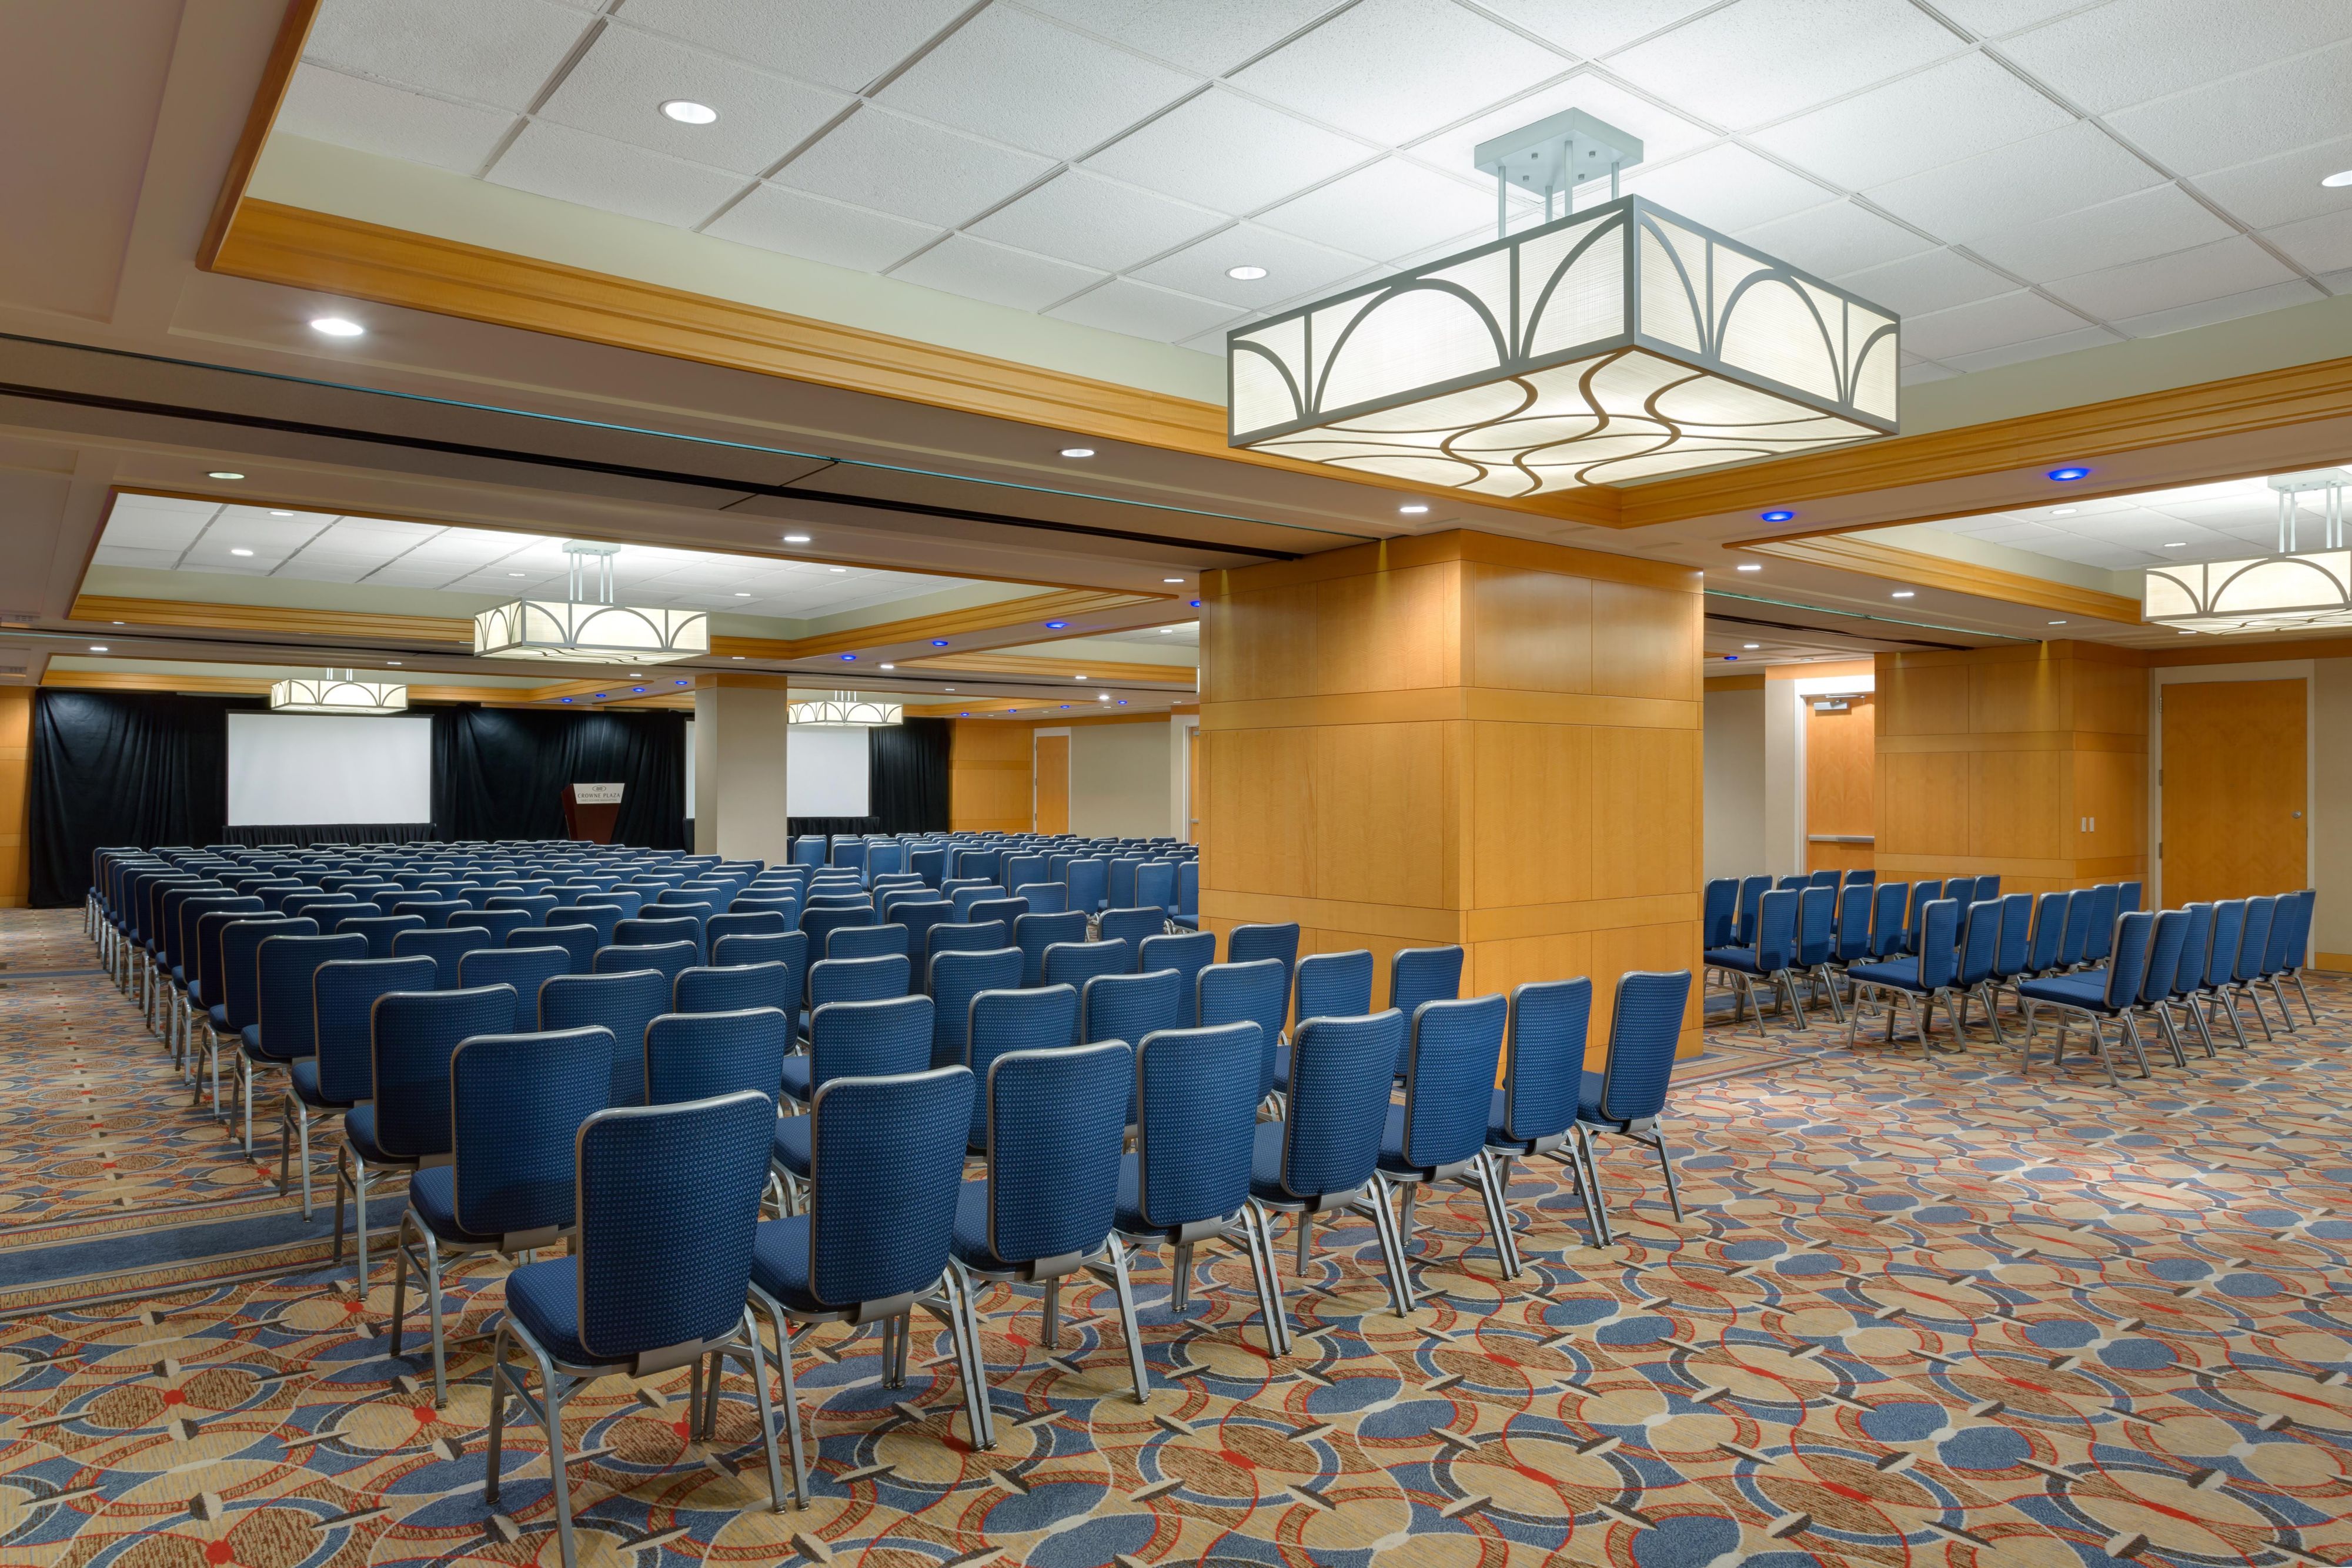 Spacious pre-function space for registration or receptions.